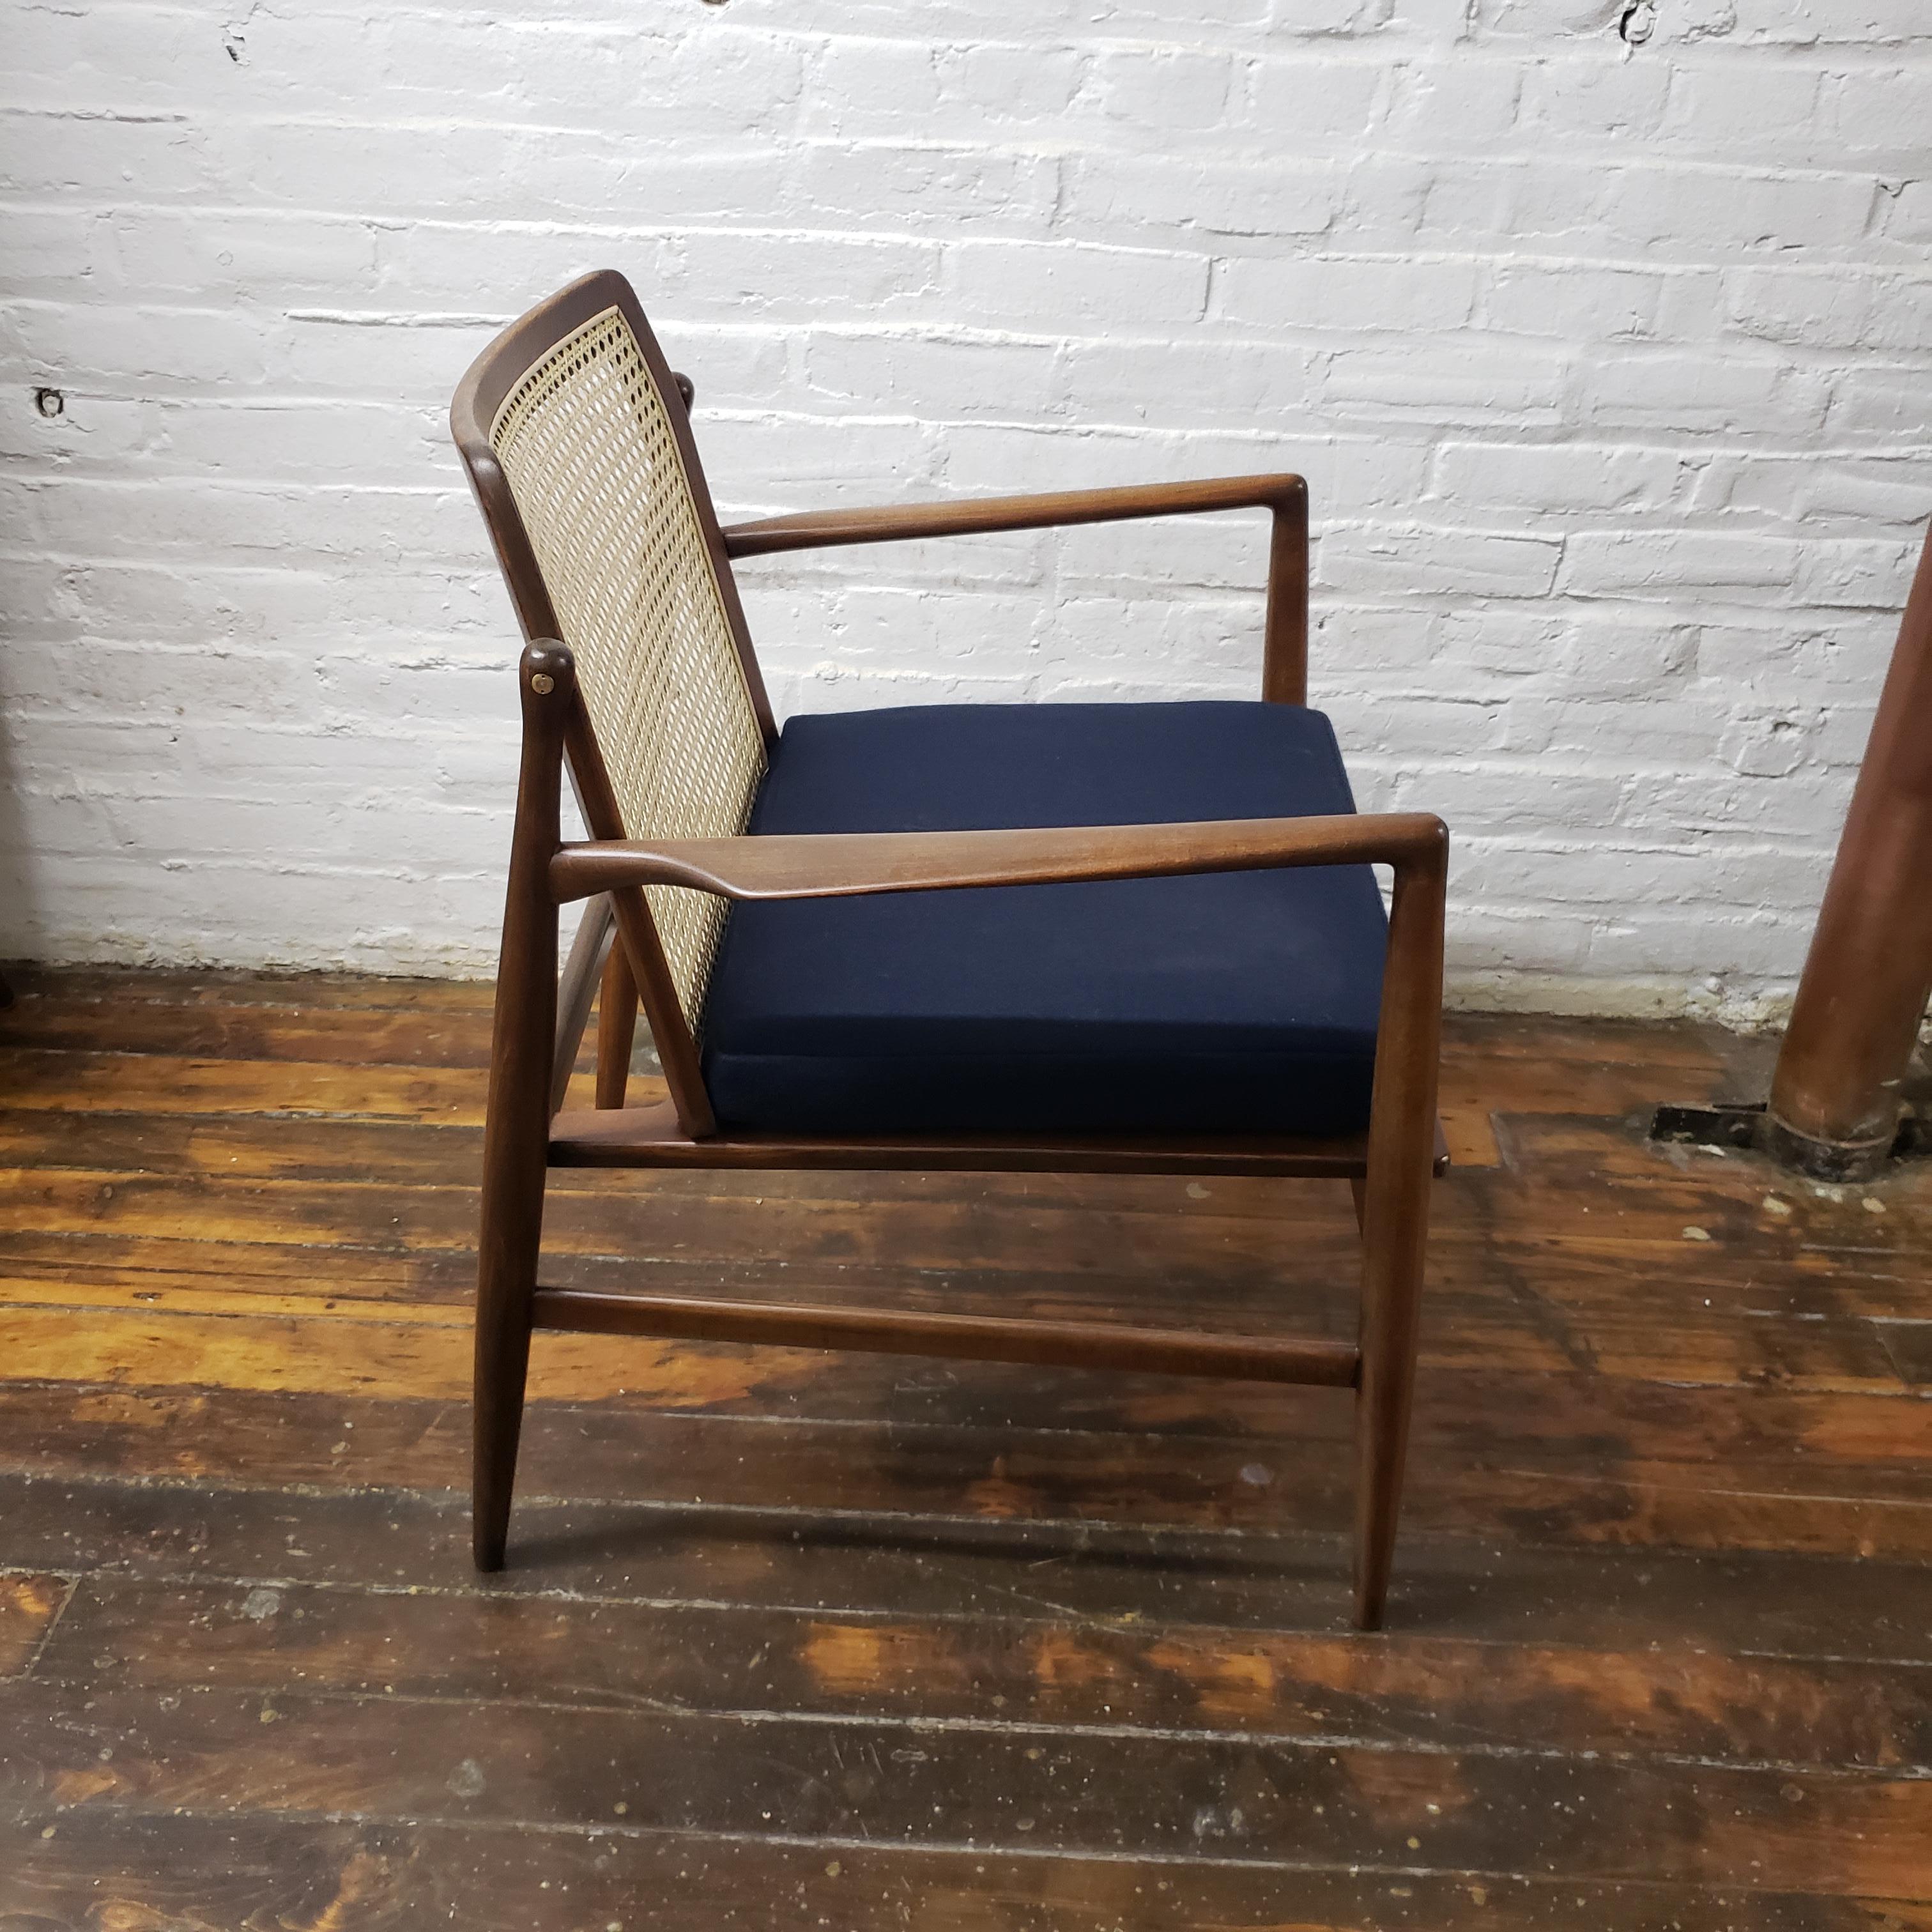 Ib Kofod-Larsen for Selig cane back side chair.

Beautiful refinished walnut and cane back chair by Ib Kofod-Larsen for Selig with new cane and navy Maharam wool upholstery.
 

 